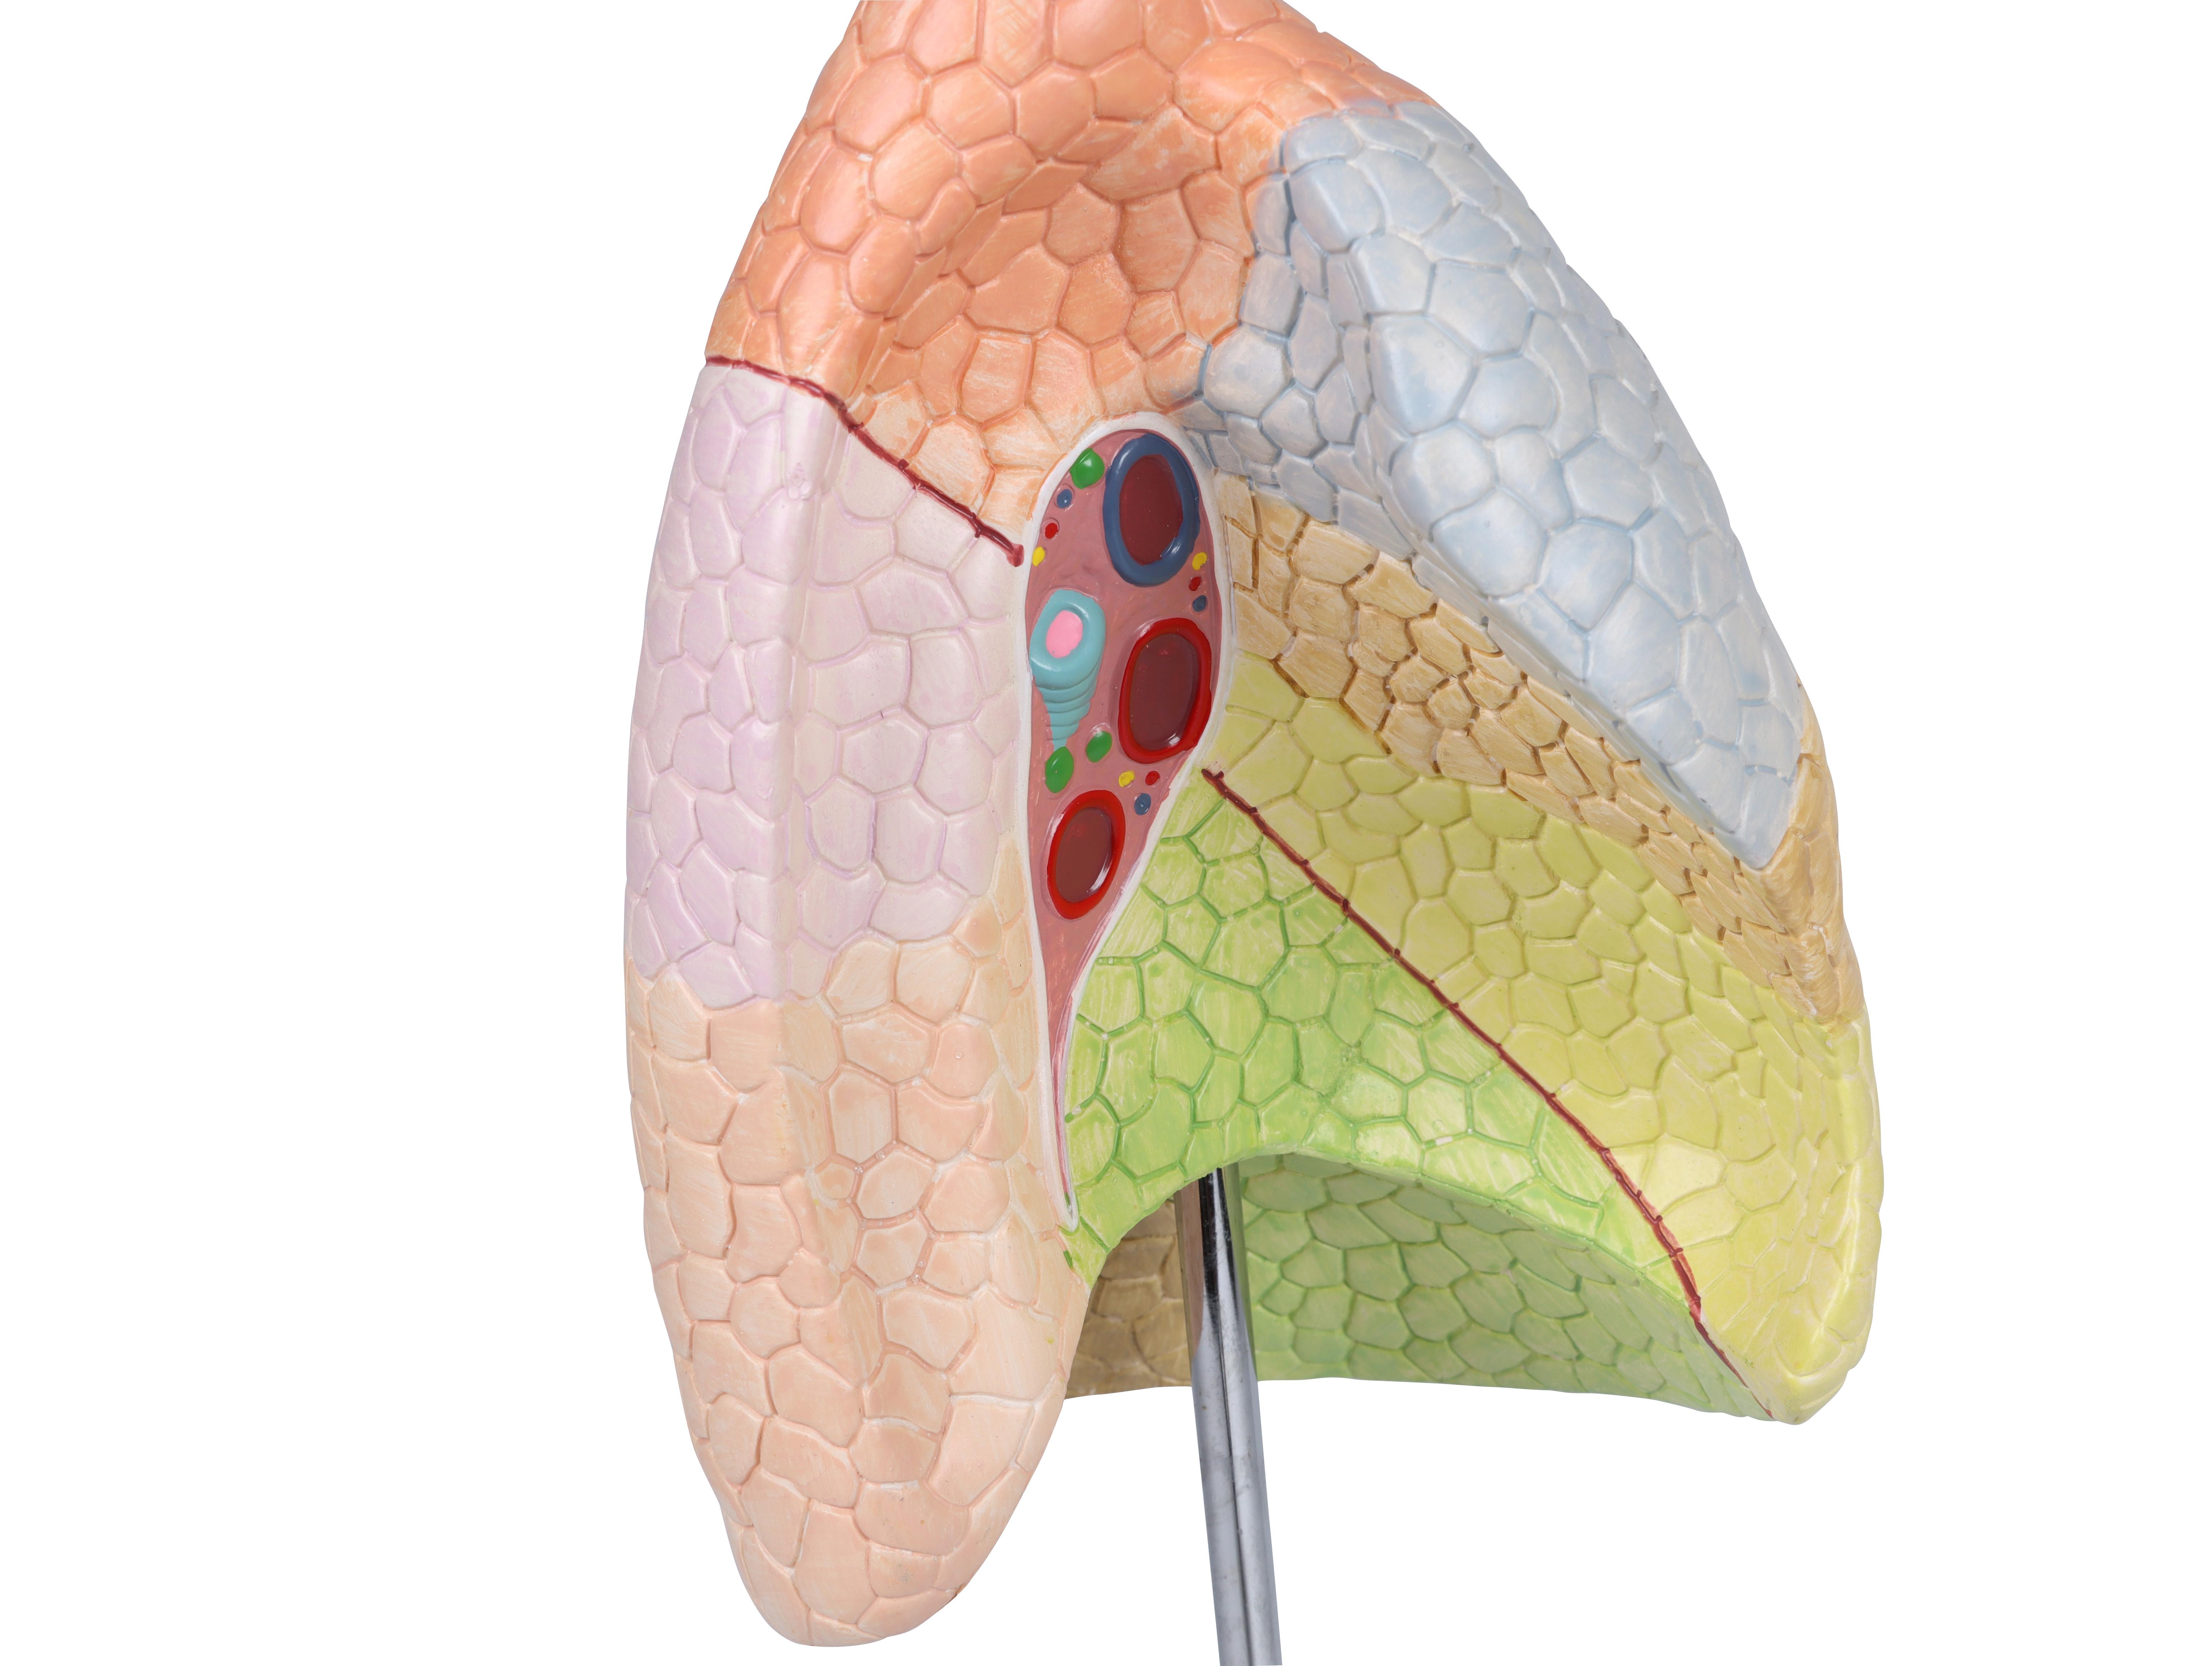 Lung-model-didactic-2-part-3